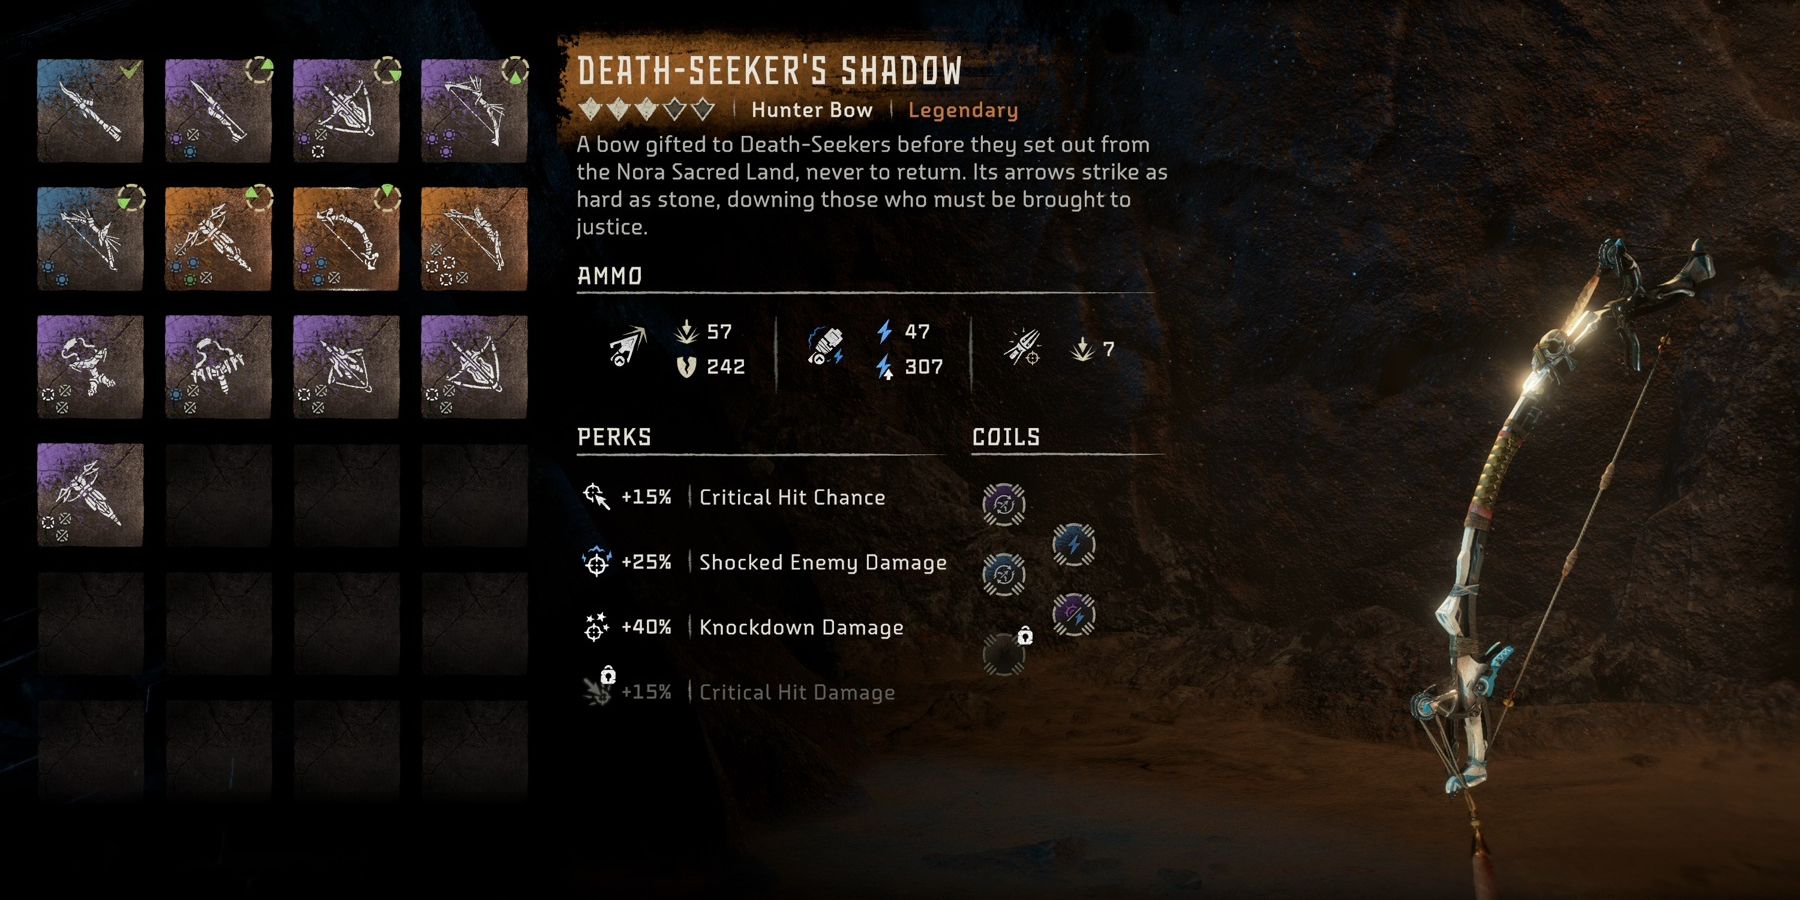 Image of the Horizon Forbidden West legendary weapon The Death-Seeker's Shadow in a menu.